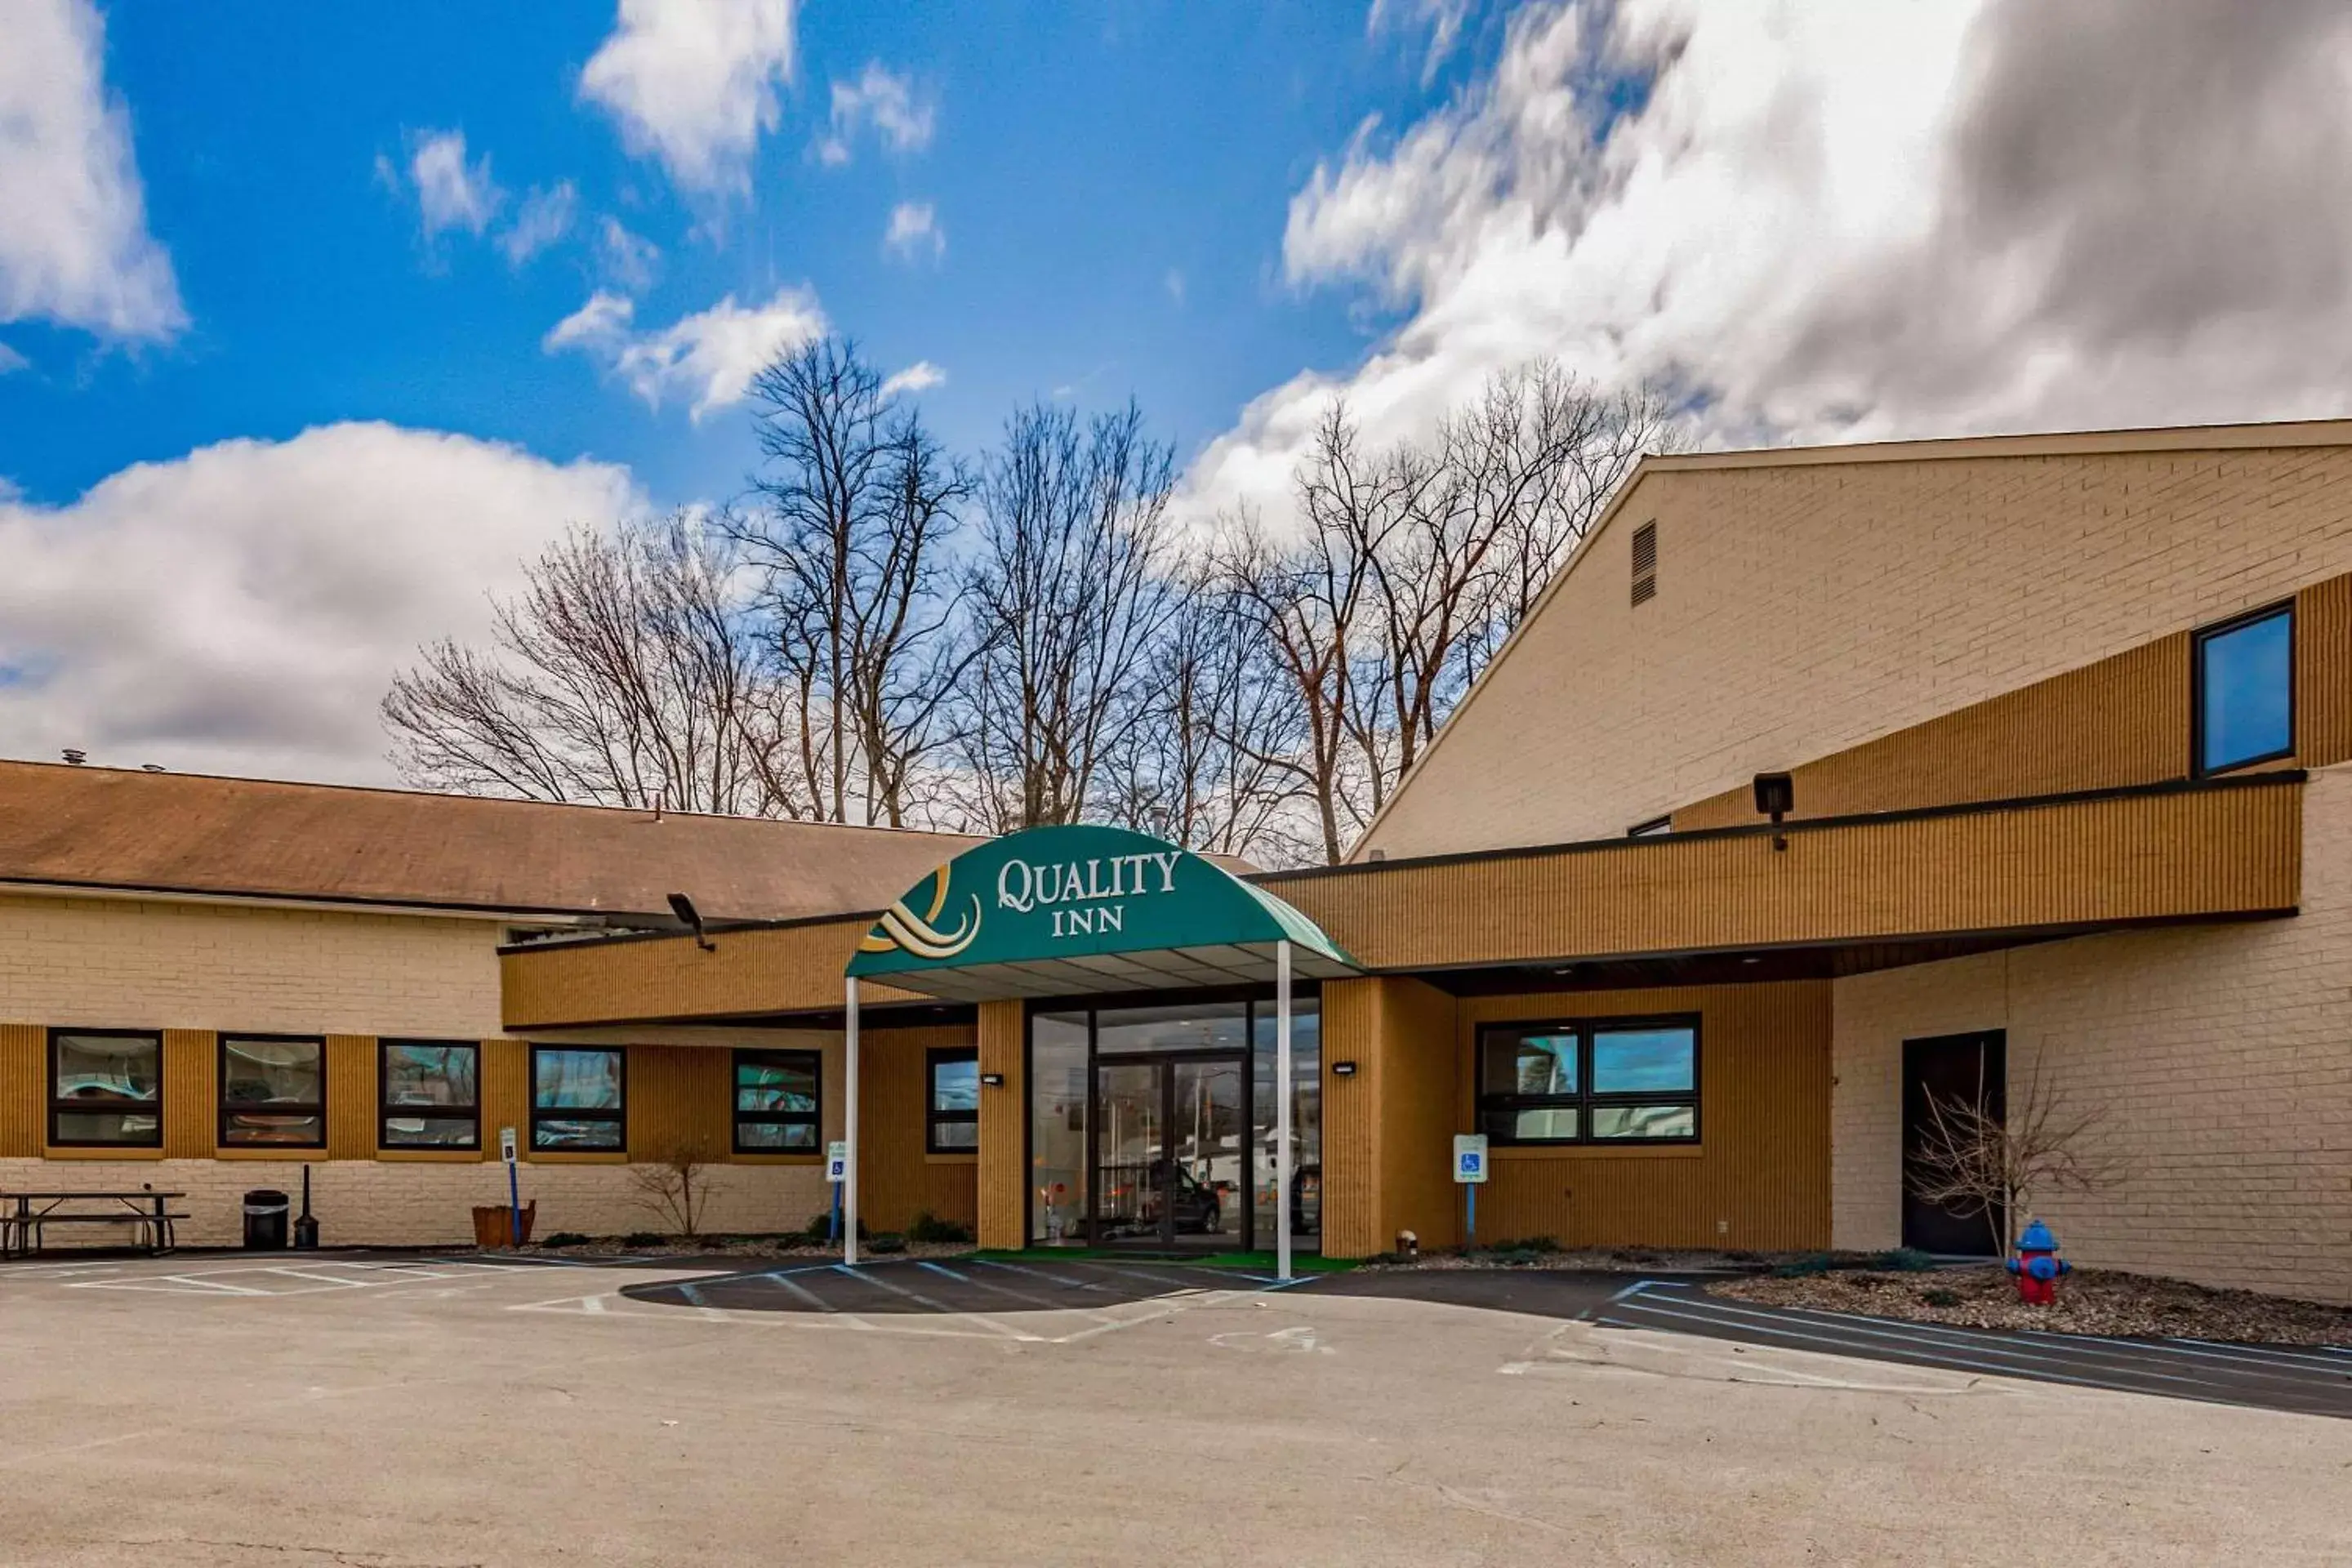 Property building in Quality Inn Schenectady - Albany